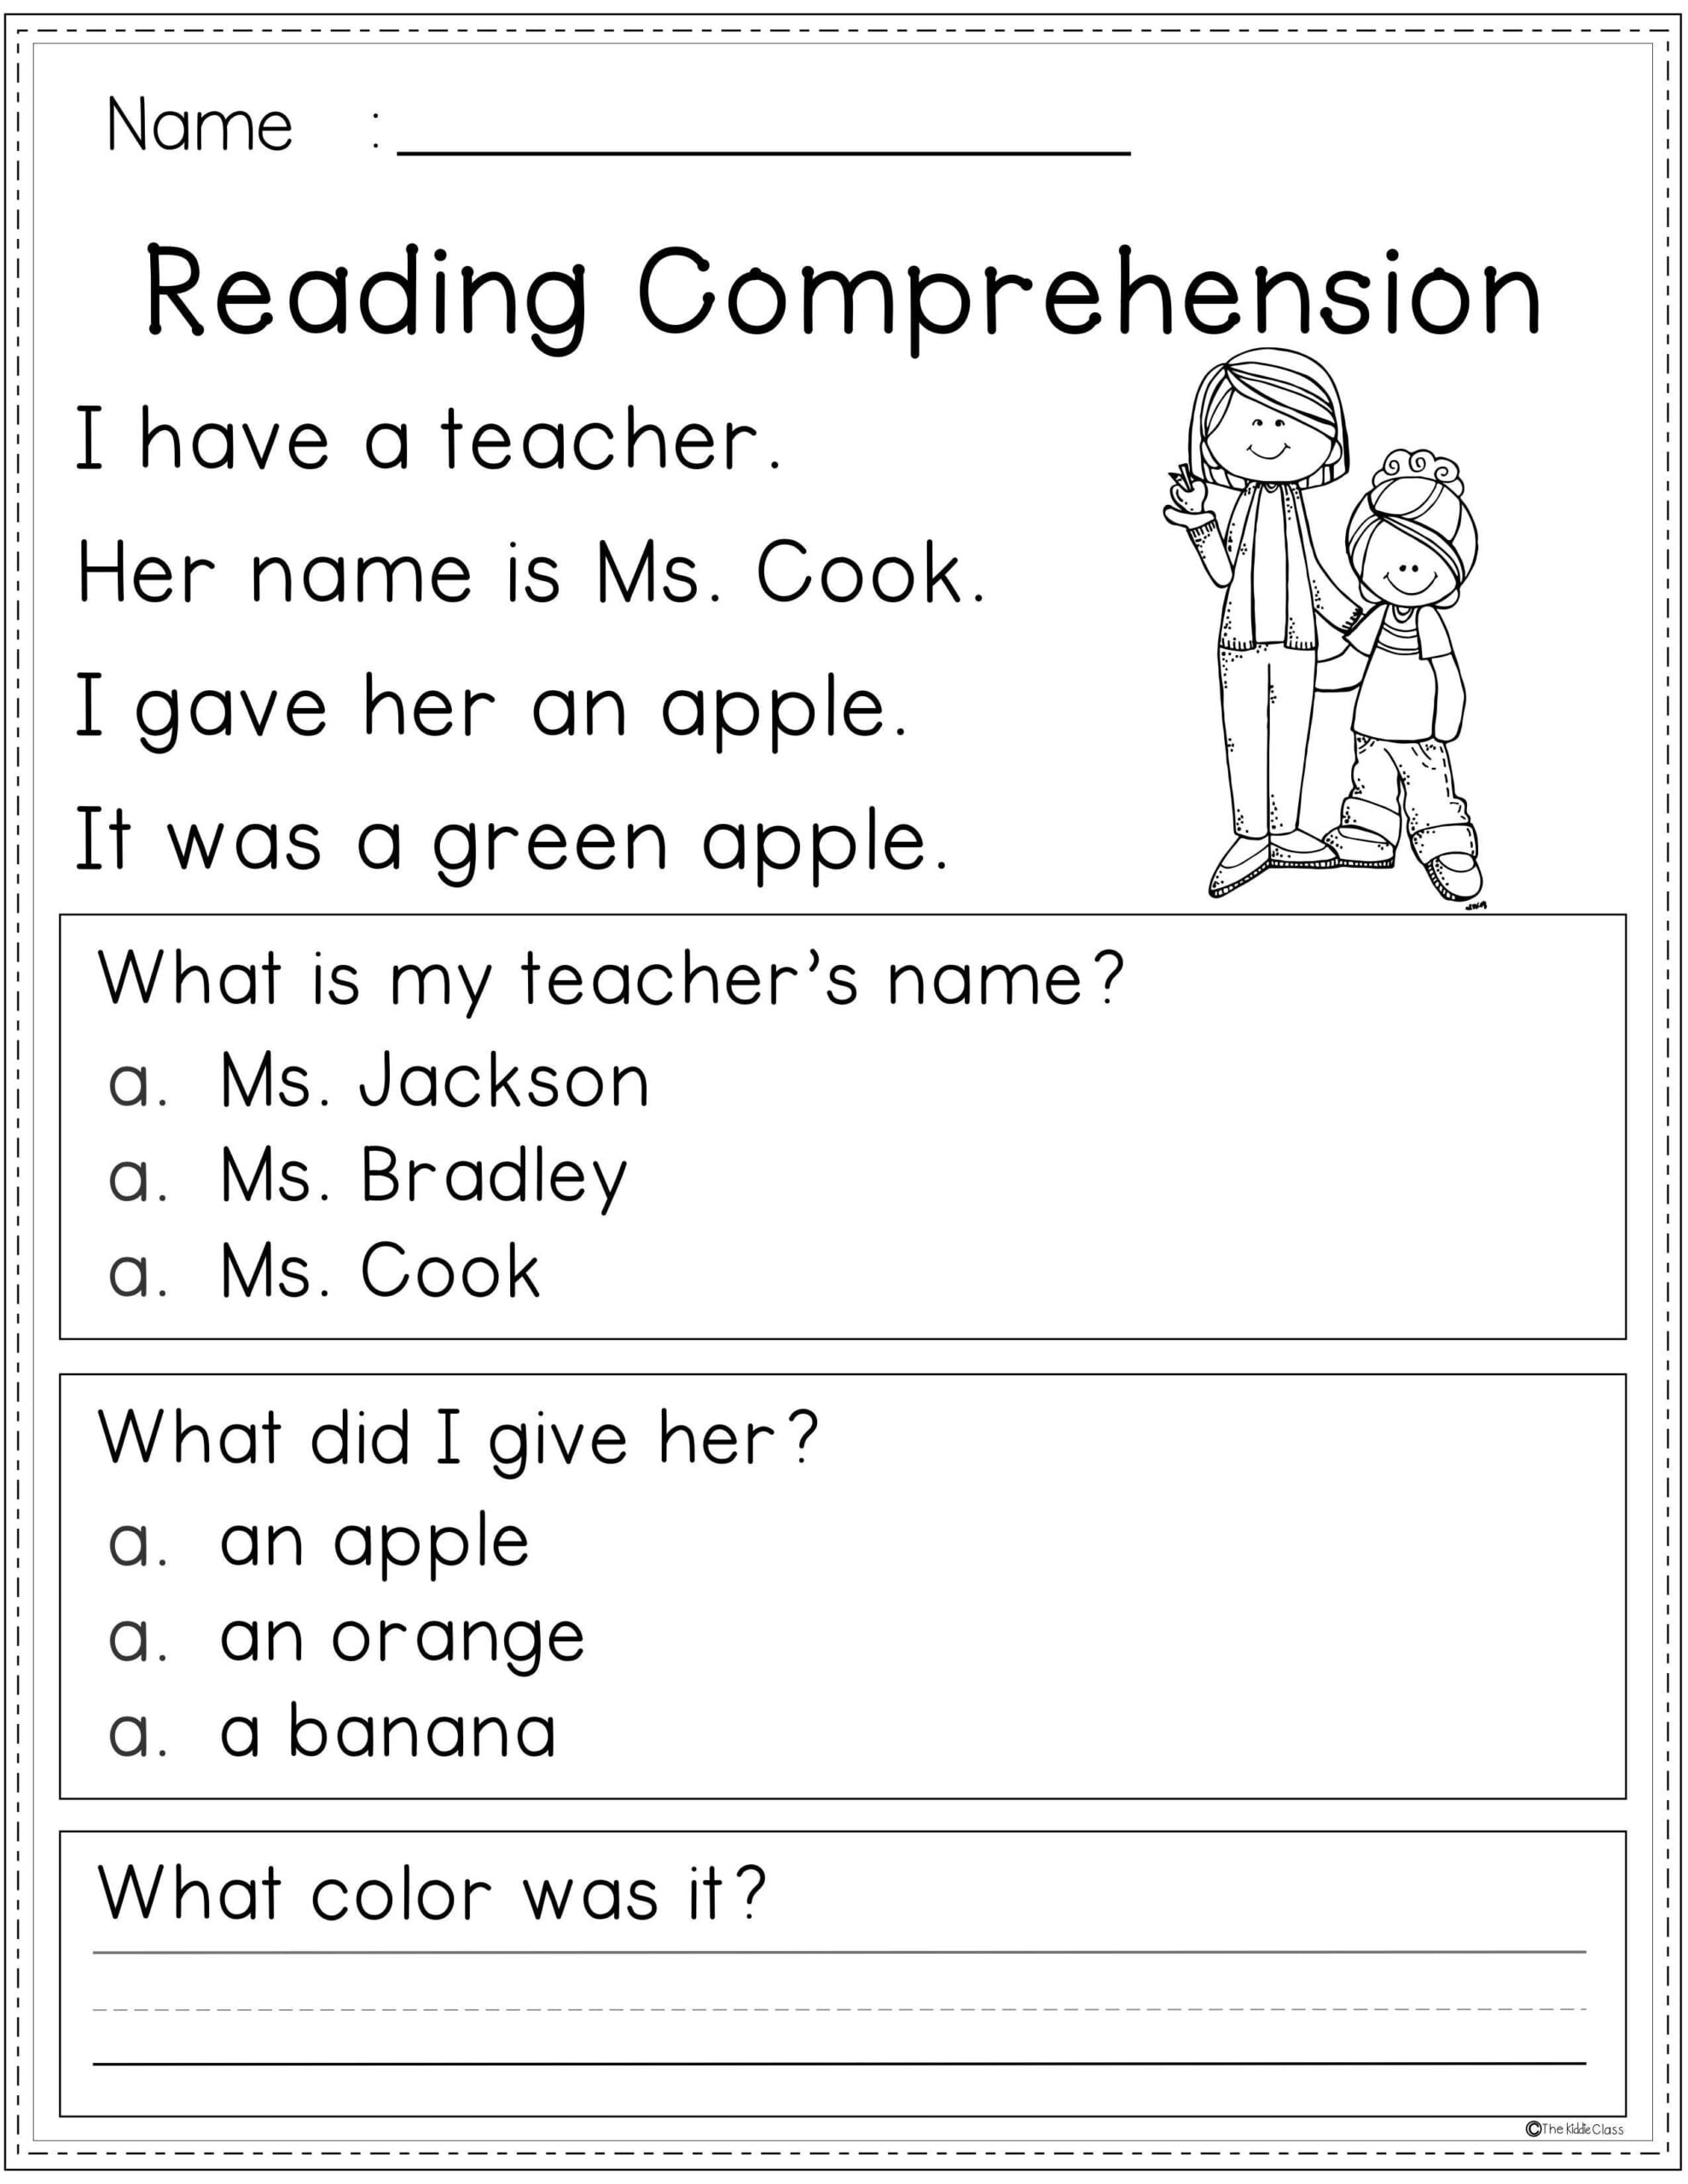 Free Printable Reading Comprehension Worksheets With Questions